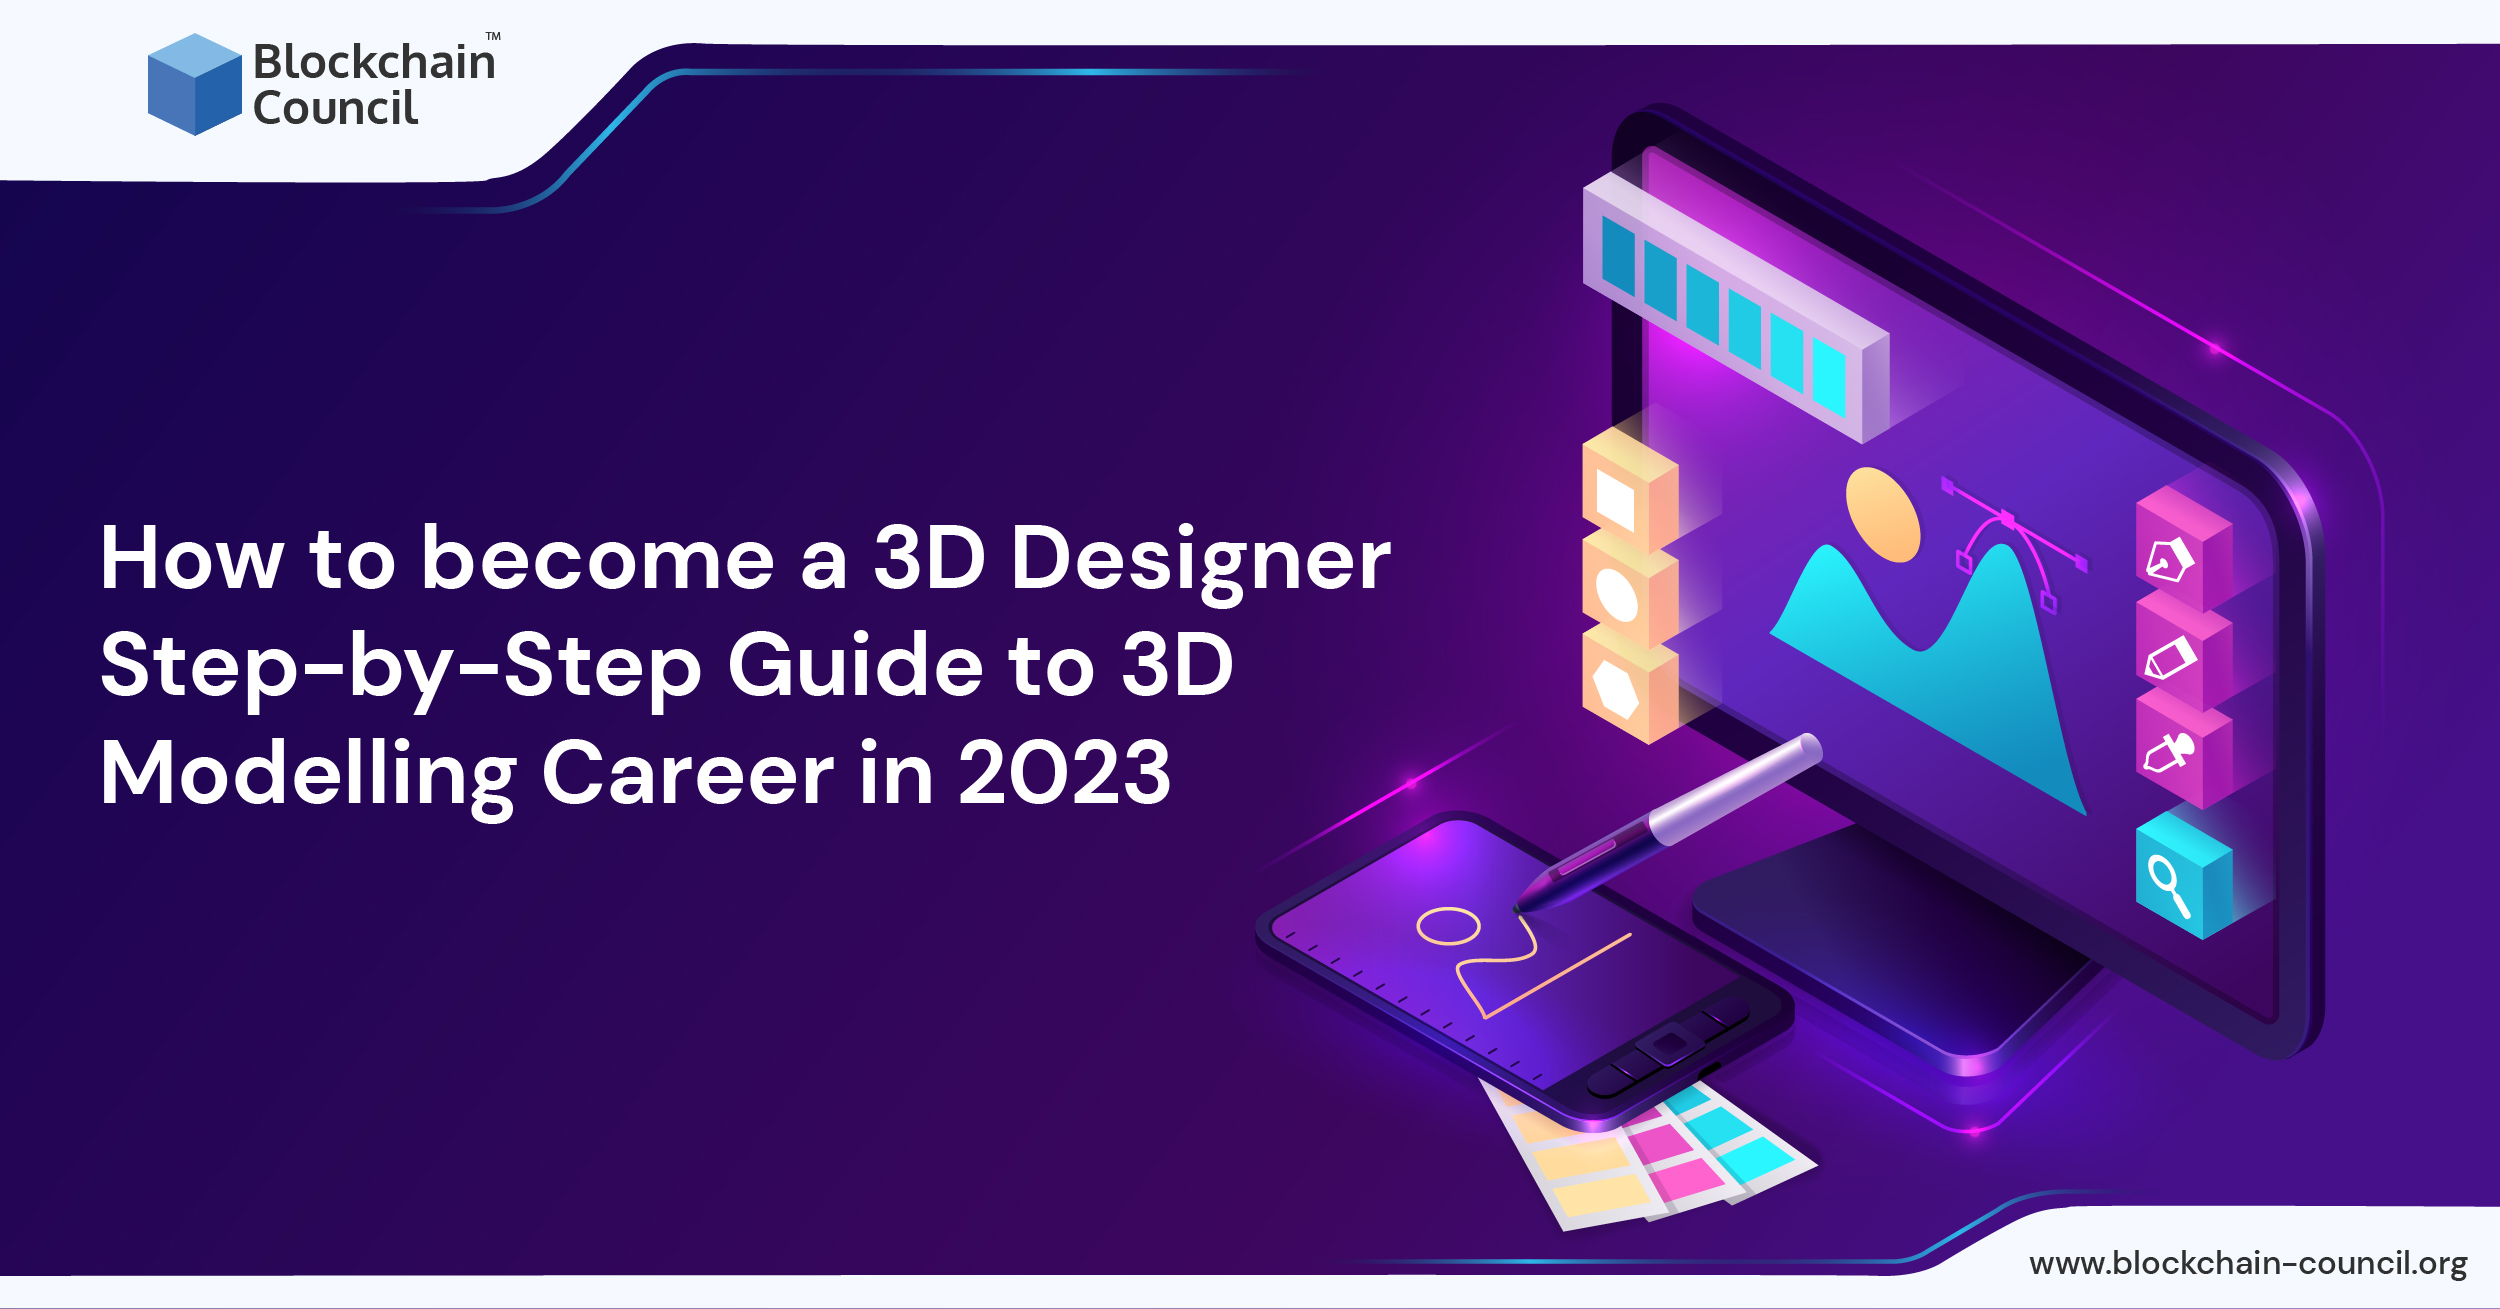 How to become a 3D Designer | Step-by-Step Guide to 3D Modelling Career in 2023